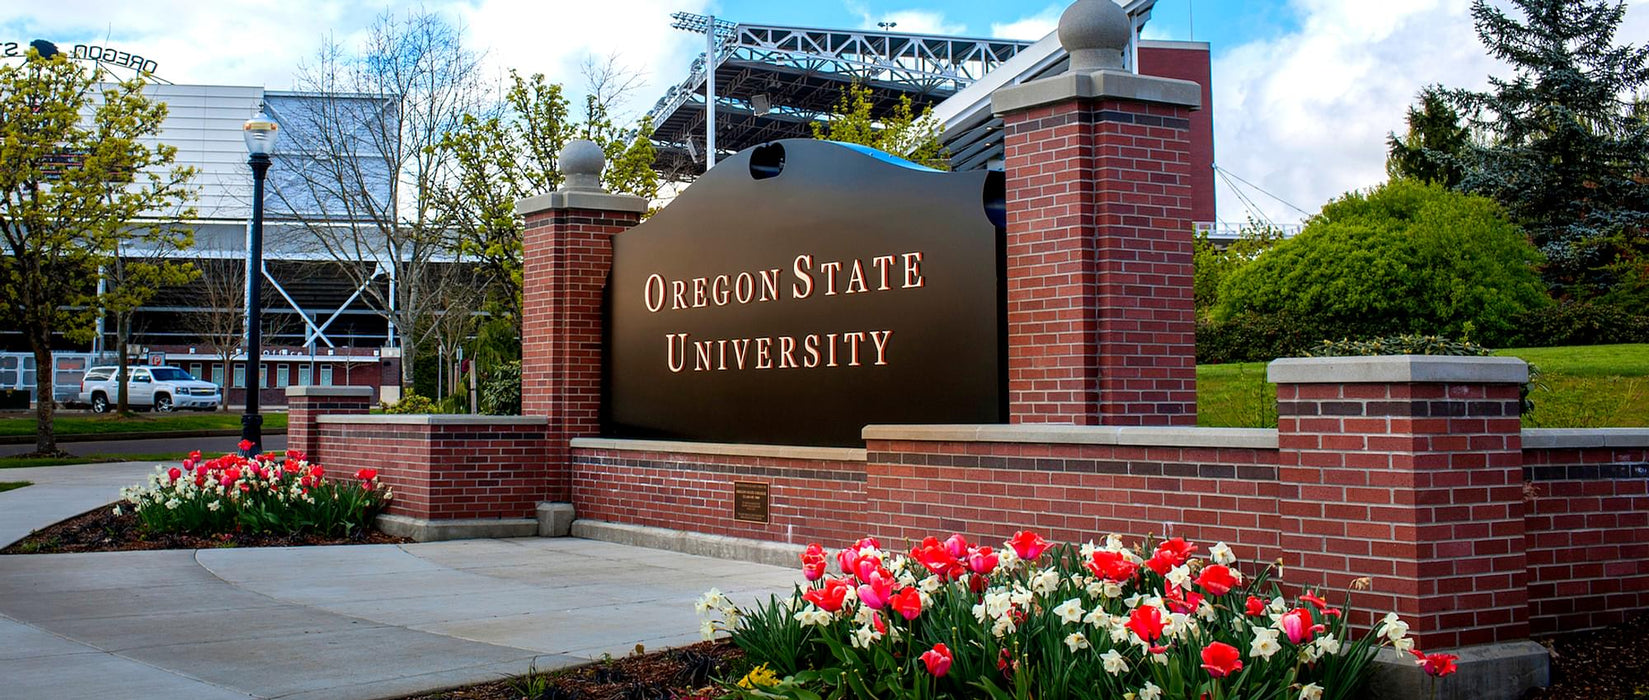 Bachelor of Science - Marketing at Oregon State University - Corvallis: Tuition: $32,790.00 USD/year (Scholarship Available)